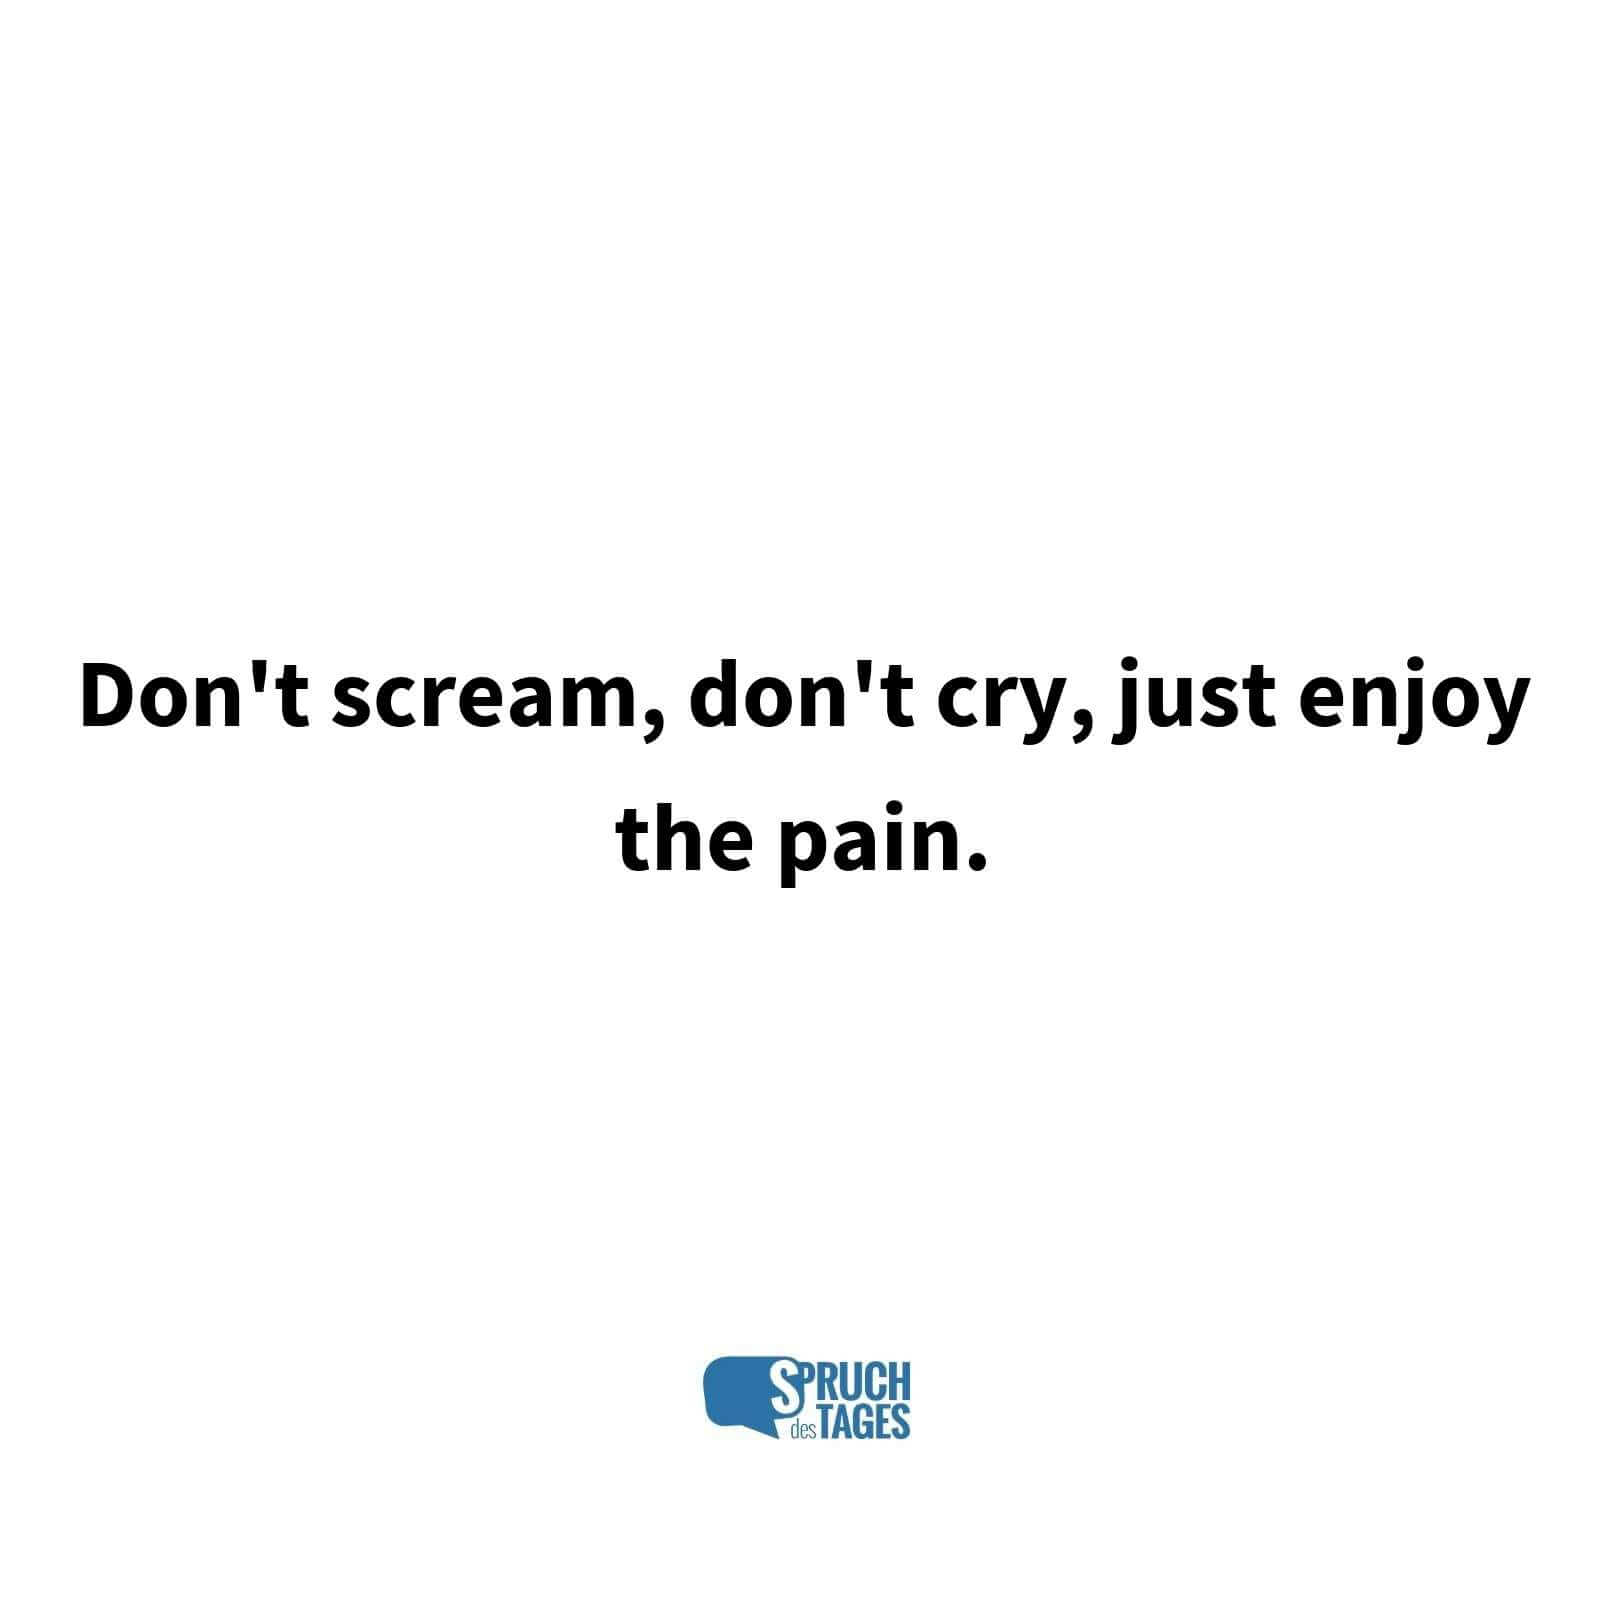 Don't scream, don't cry, just enjoy the pain.